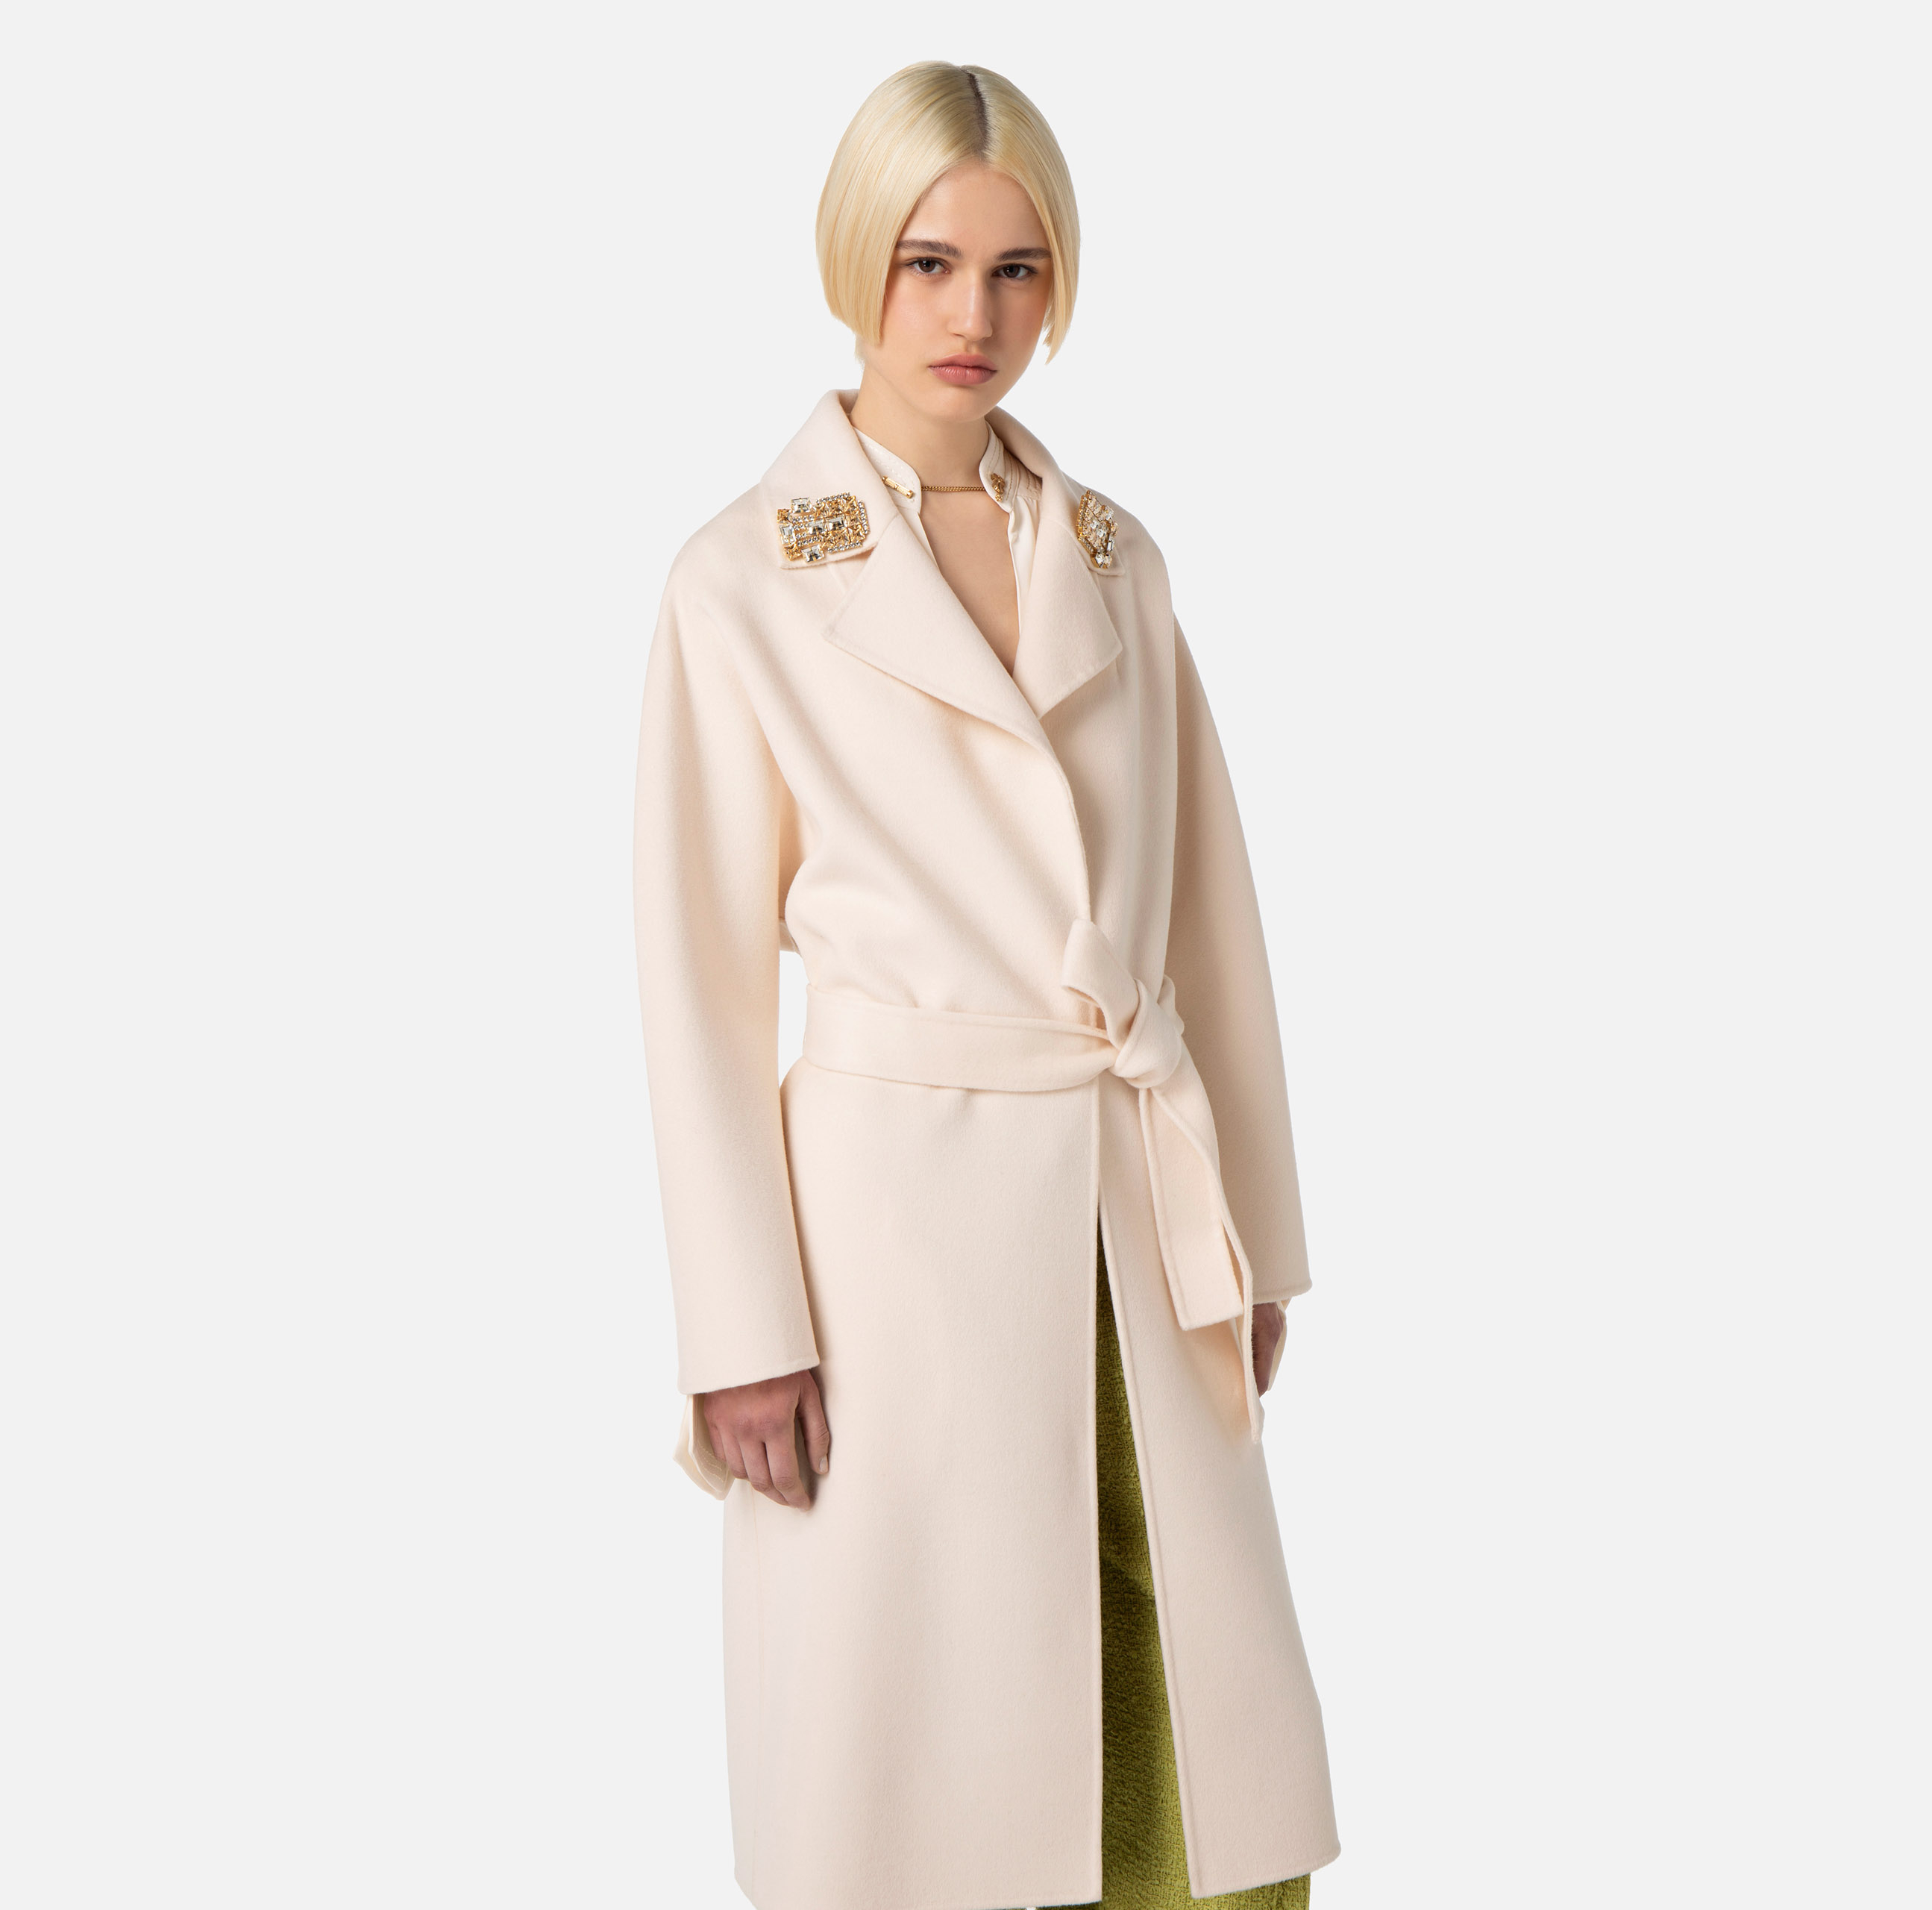 Wool coat with pins on the lapel - Elisabetta Franchi